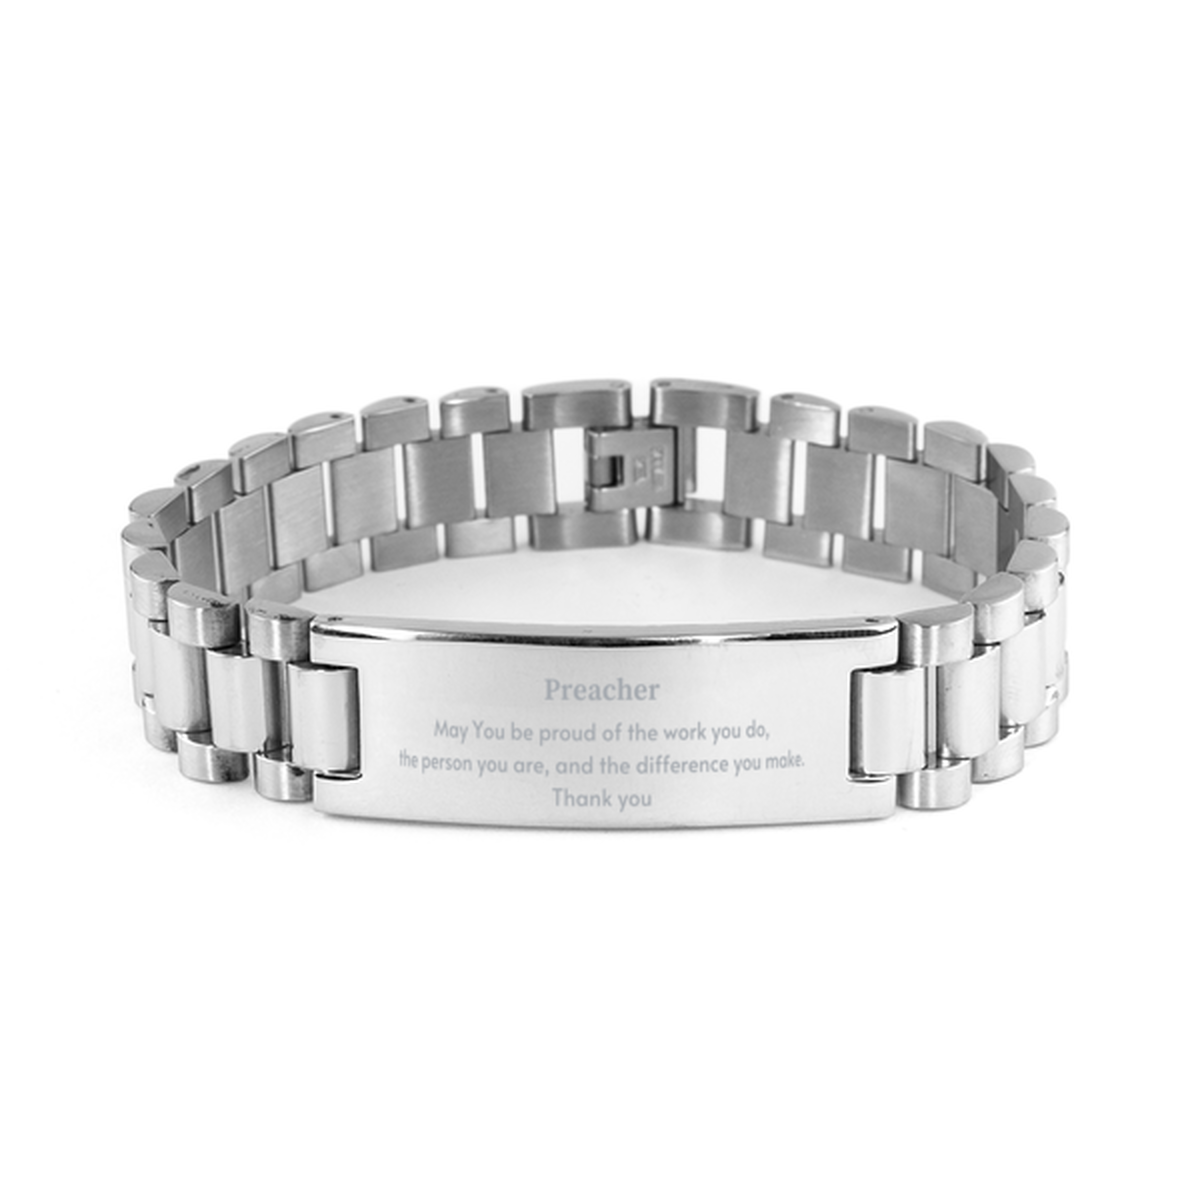 Heartwarming Ladder Stainless Steel Bracelet Retirement Coworkers Gifts for Preacher, Preacher May You be proud of the work you do, the person you are Gifts for Boss Men Women Friends